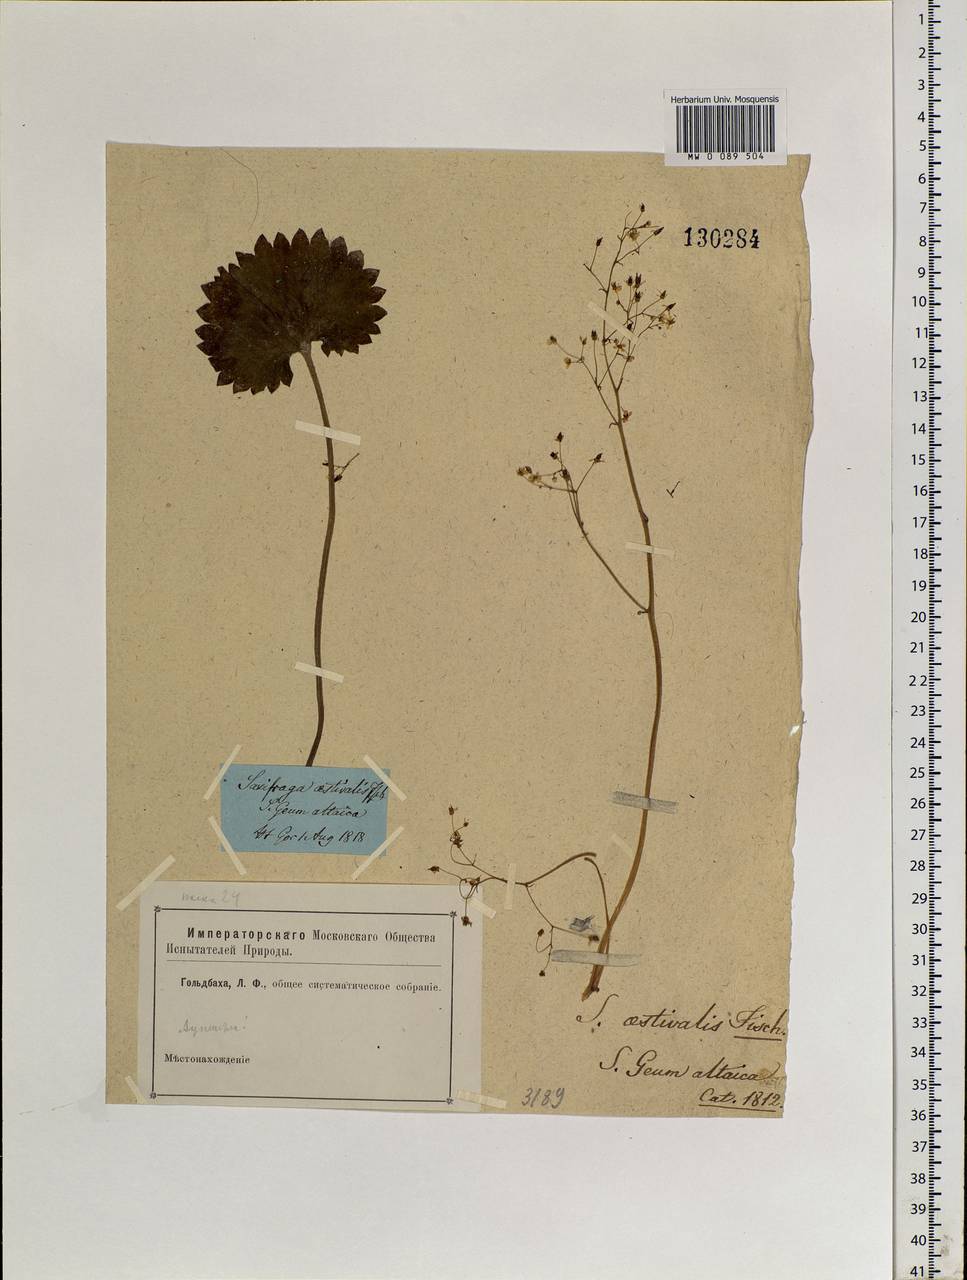 Micranthes nelsoniana subsp. aestivalis (Fisch. & C. A. Mey.) Elven & D. F. Murray, Siberia (no precise locality) (S0) (Russia)